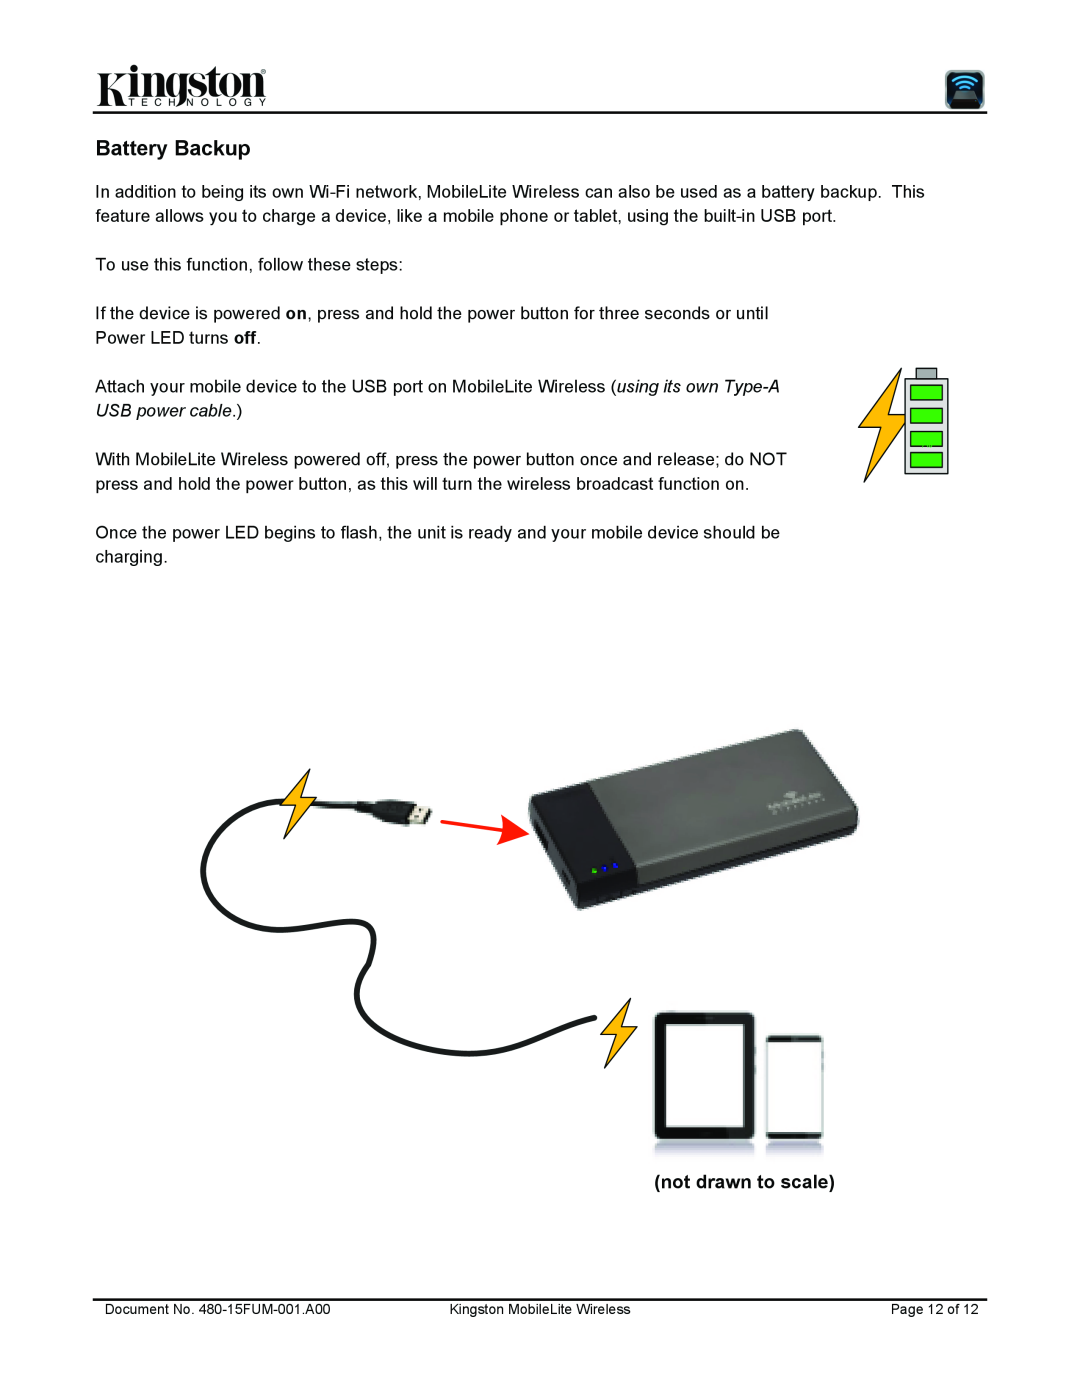 Kingston Technology 480-15FUM-001.A00 user manual Battery Backup, not drawn to scale 